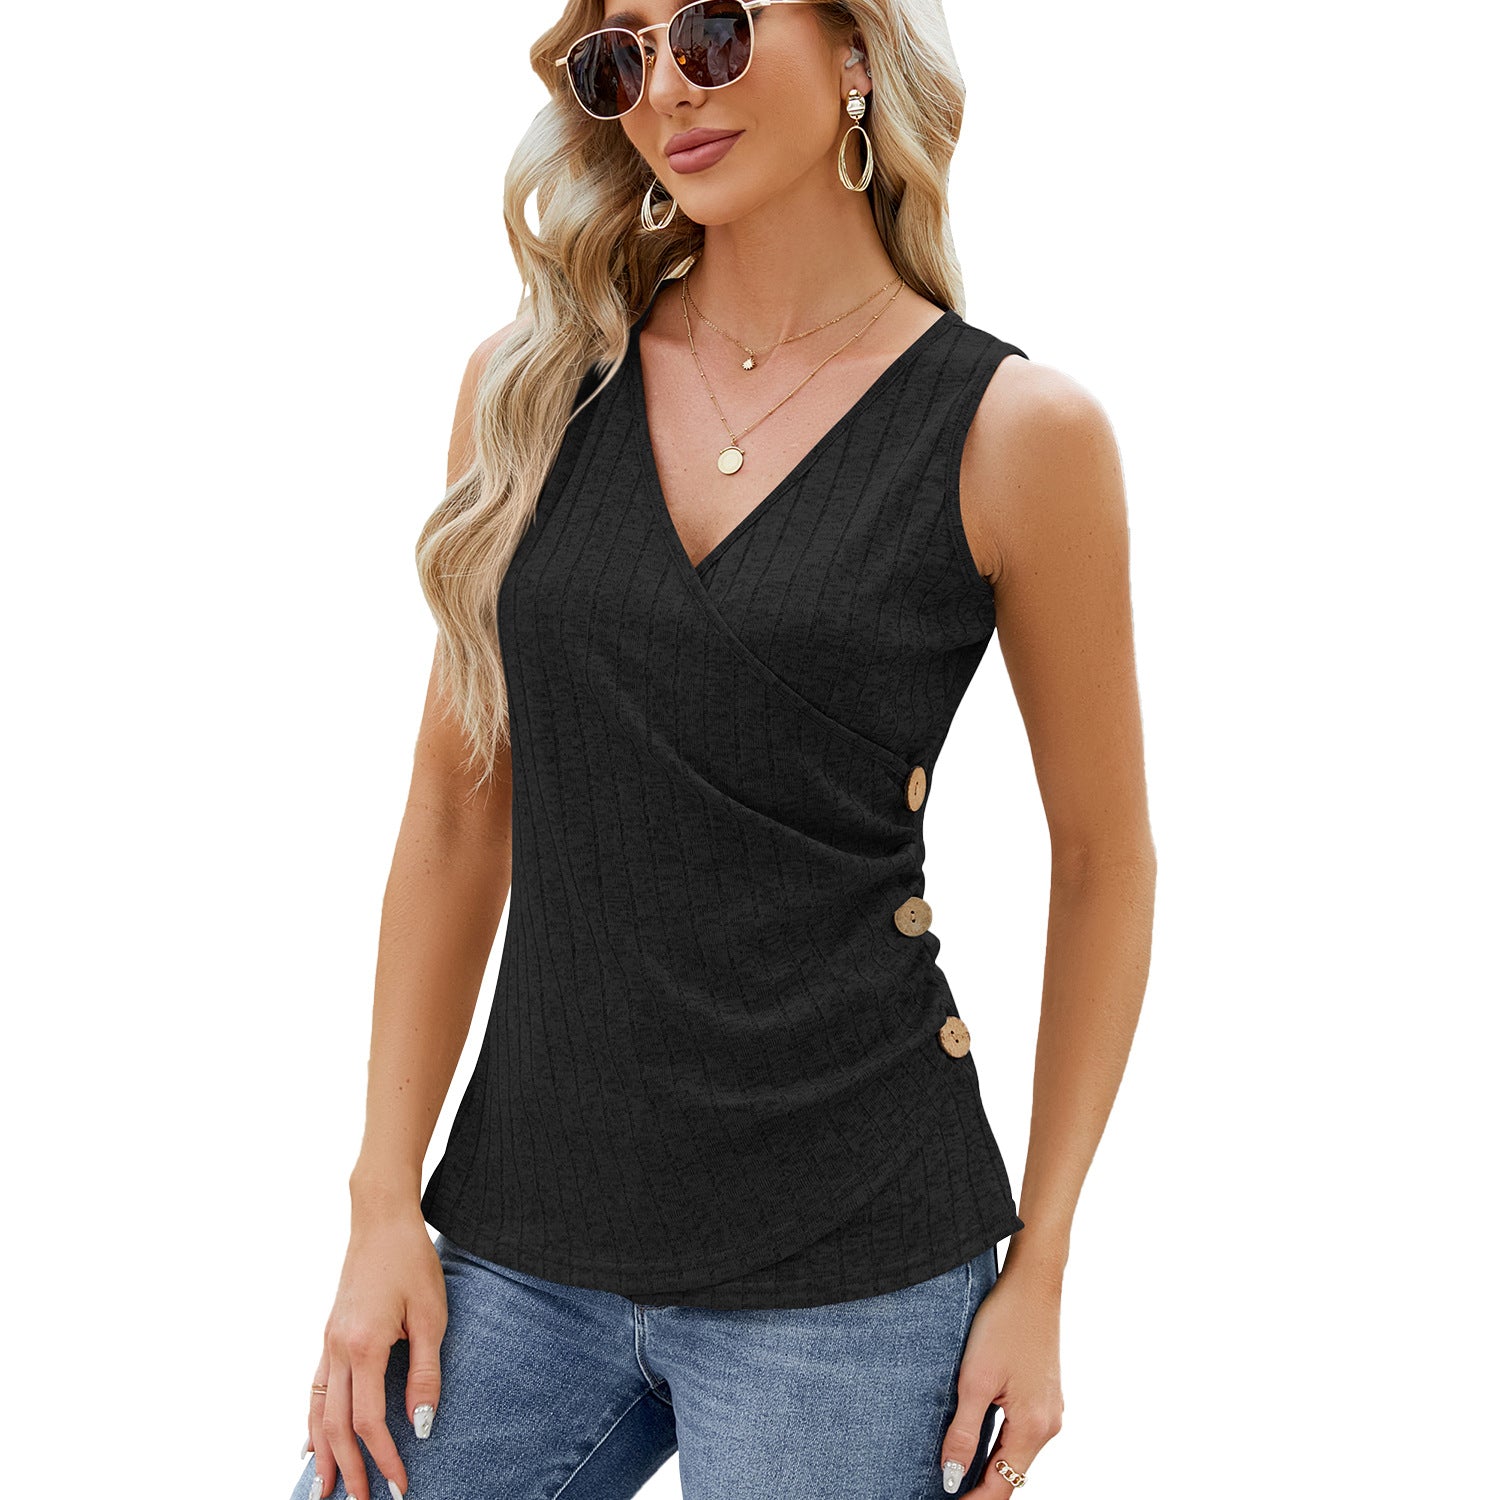 Summer Solid Color V neck Button Cinched Sleeveless Vest Top Ladies